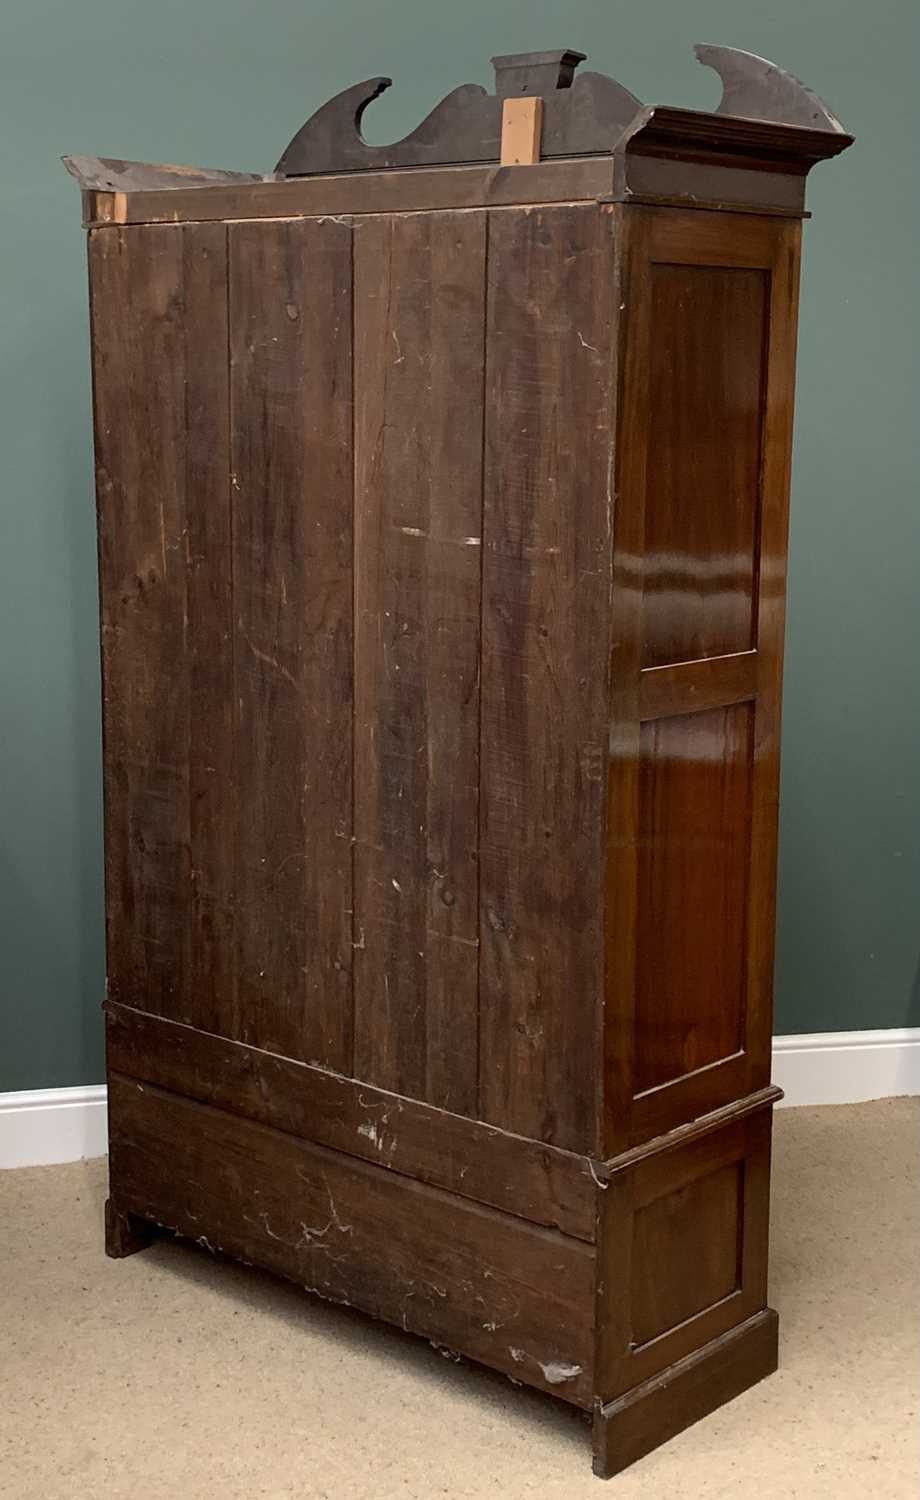 EDWARDIAN MAHOGANY SINGLE MIRRORED DOOR WARDROBE - with carved front and base drawer, 218cms H, - Image 3 of 3